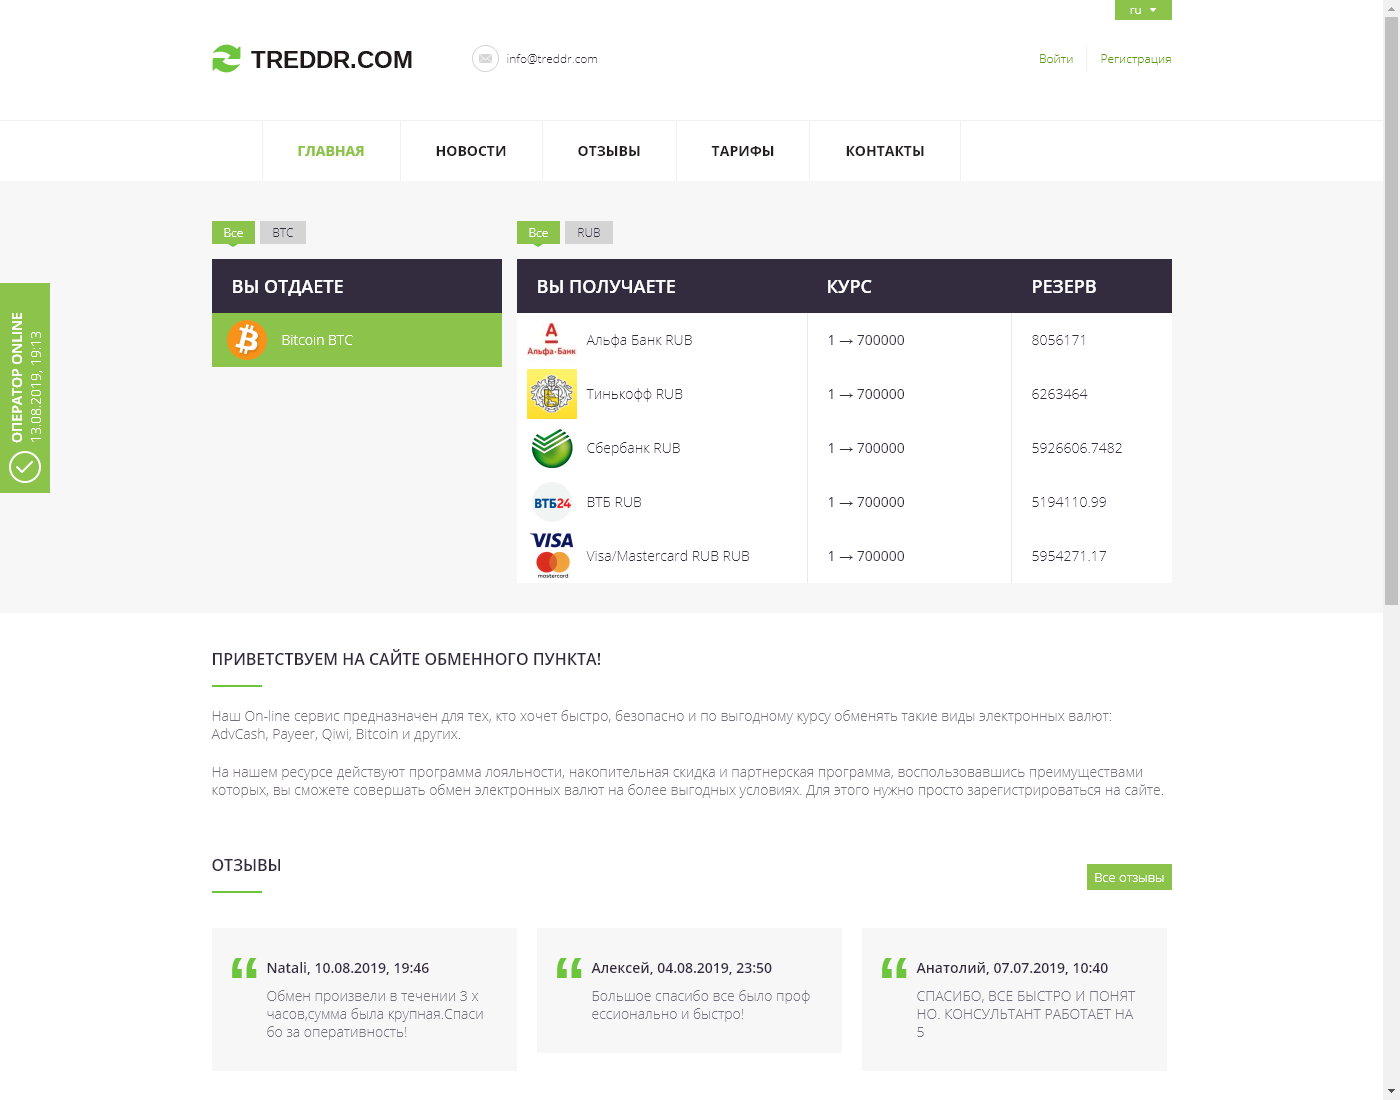 Treddr user interface: the home page in English